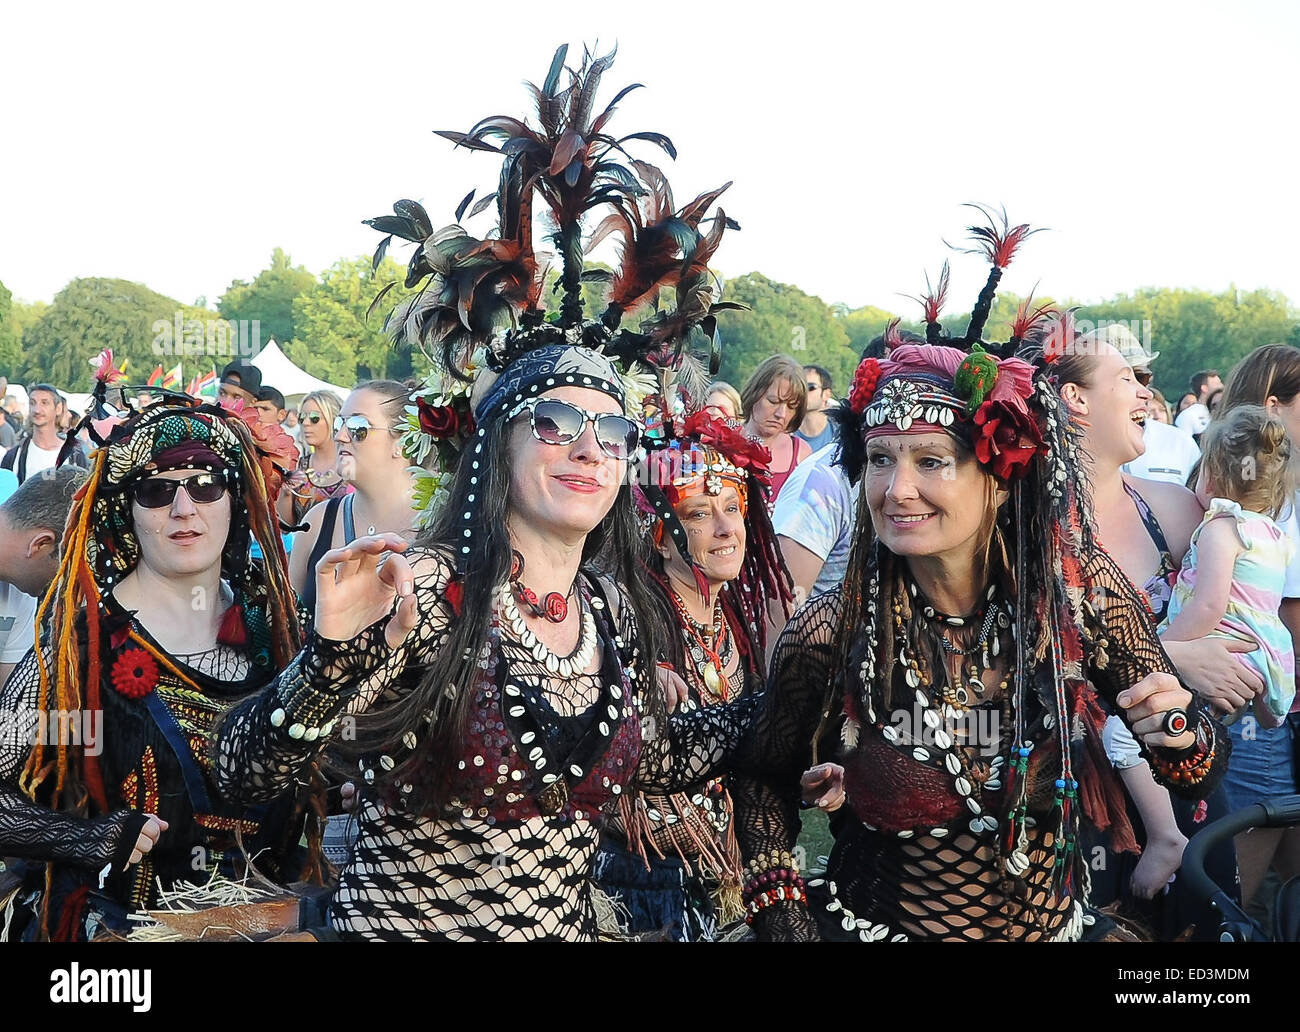 Africa Oye festival at Sefton Park is the UK's largest free festival which celebrates African culture and music  Where: Liverpool, United Kingdom When: 22 Jun 2014 Stock Photo